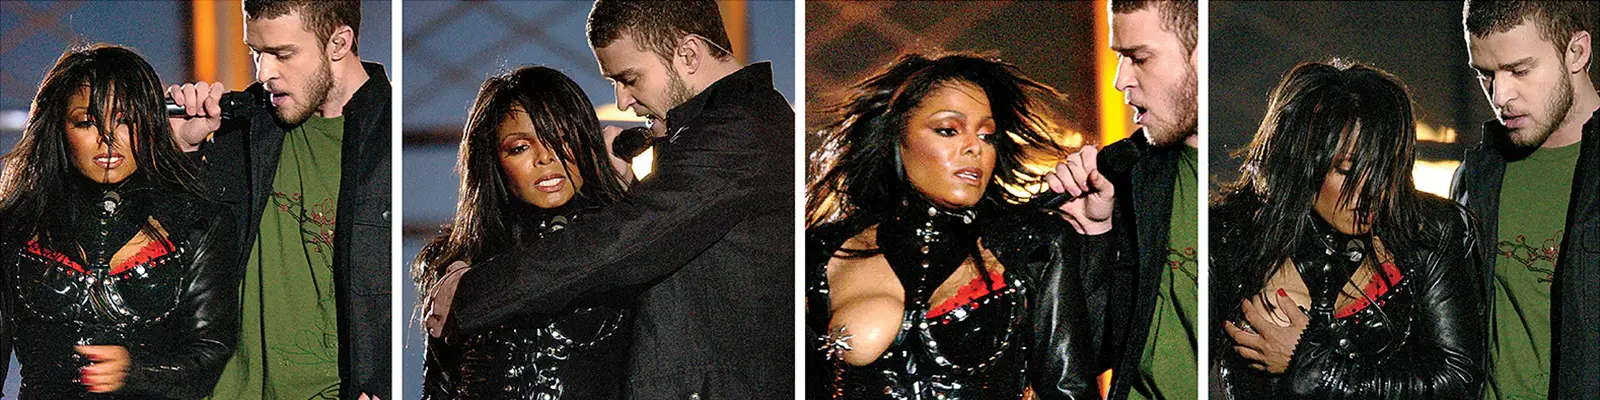 The one where Janet Jackson's nipple was exposed to an outraged Am...